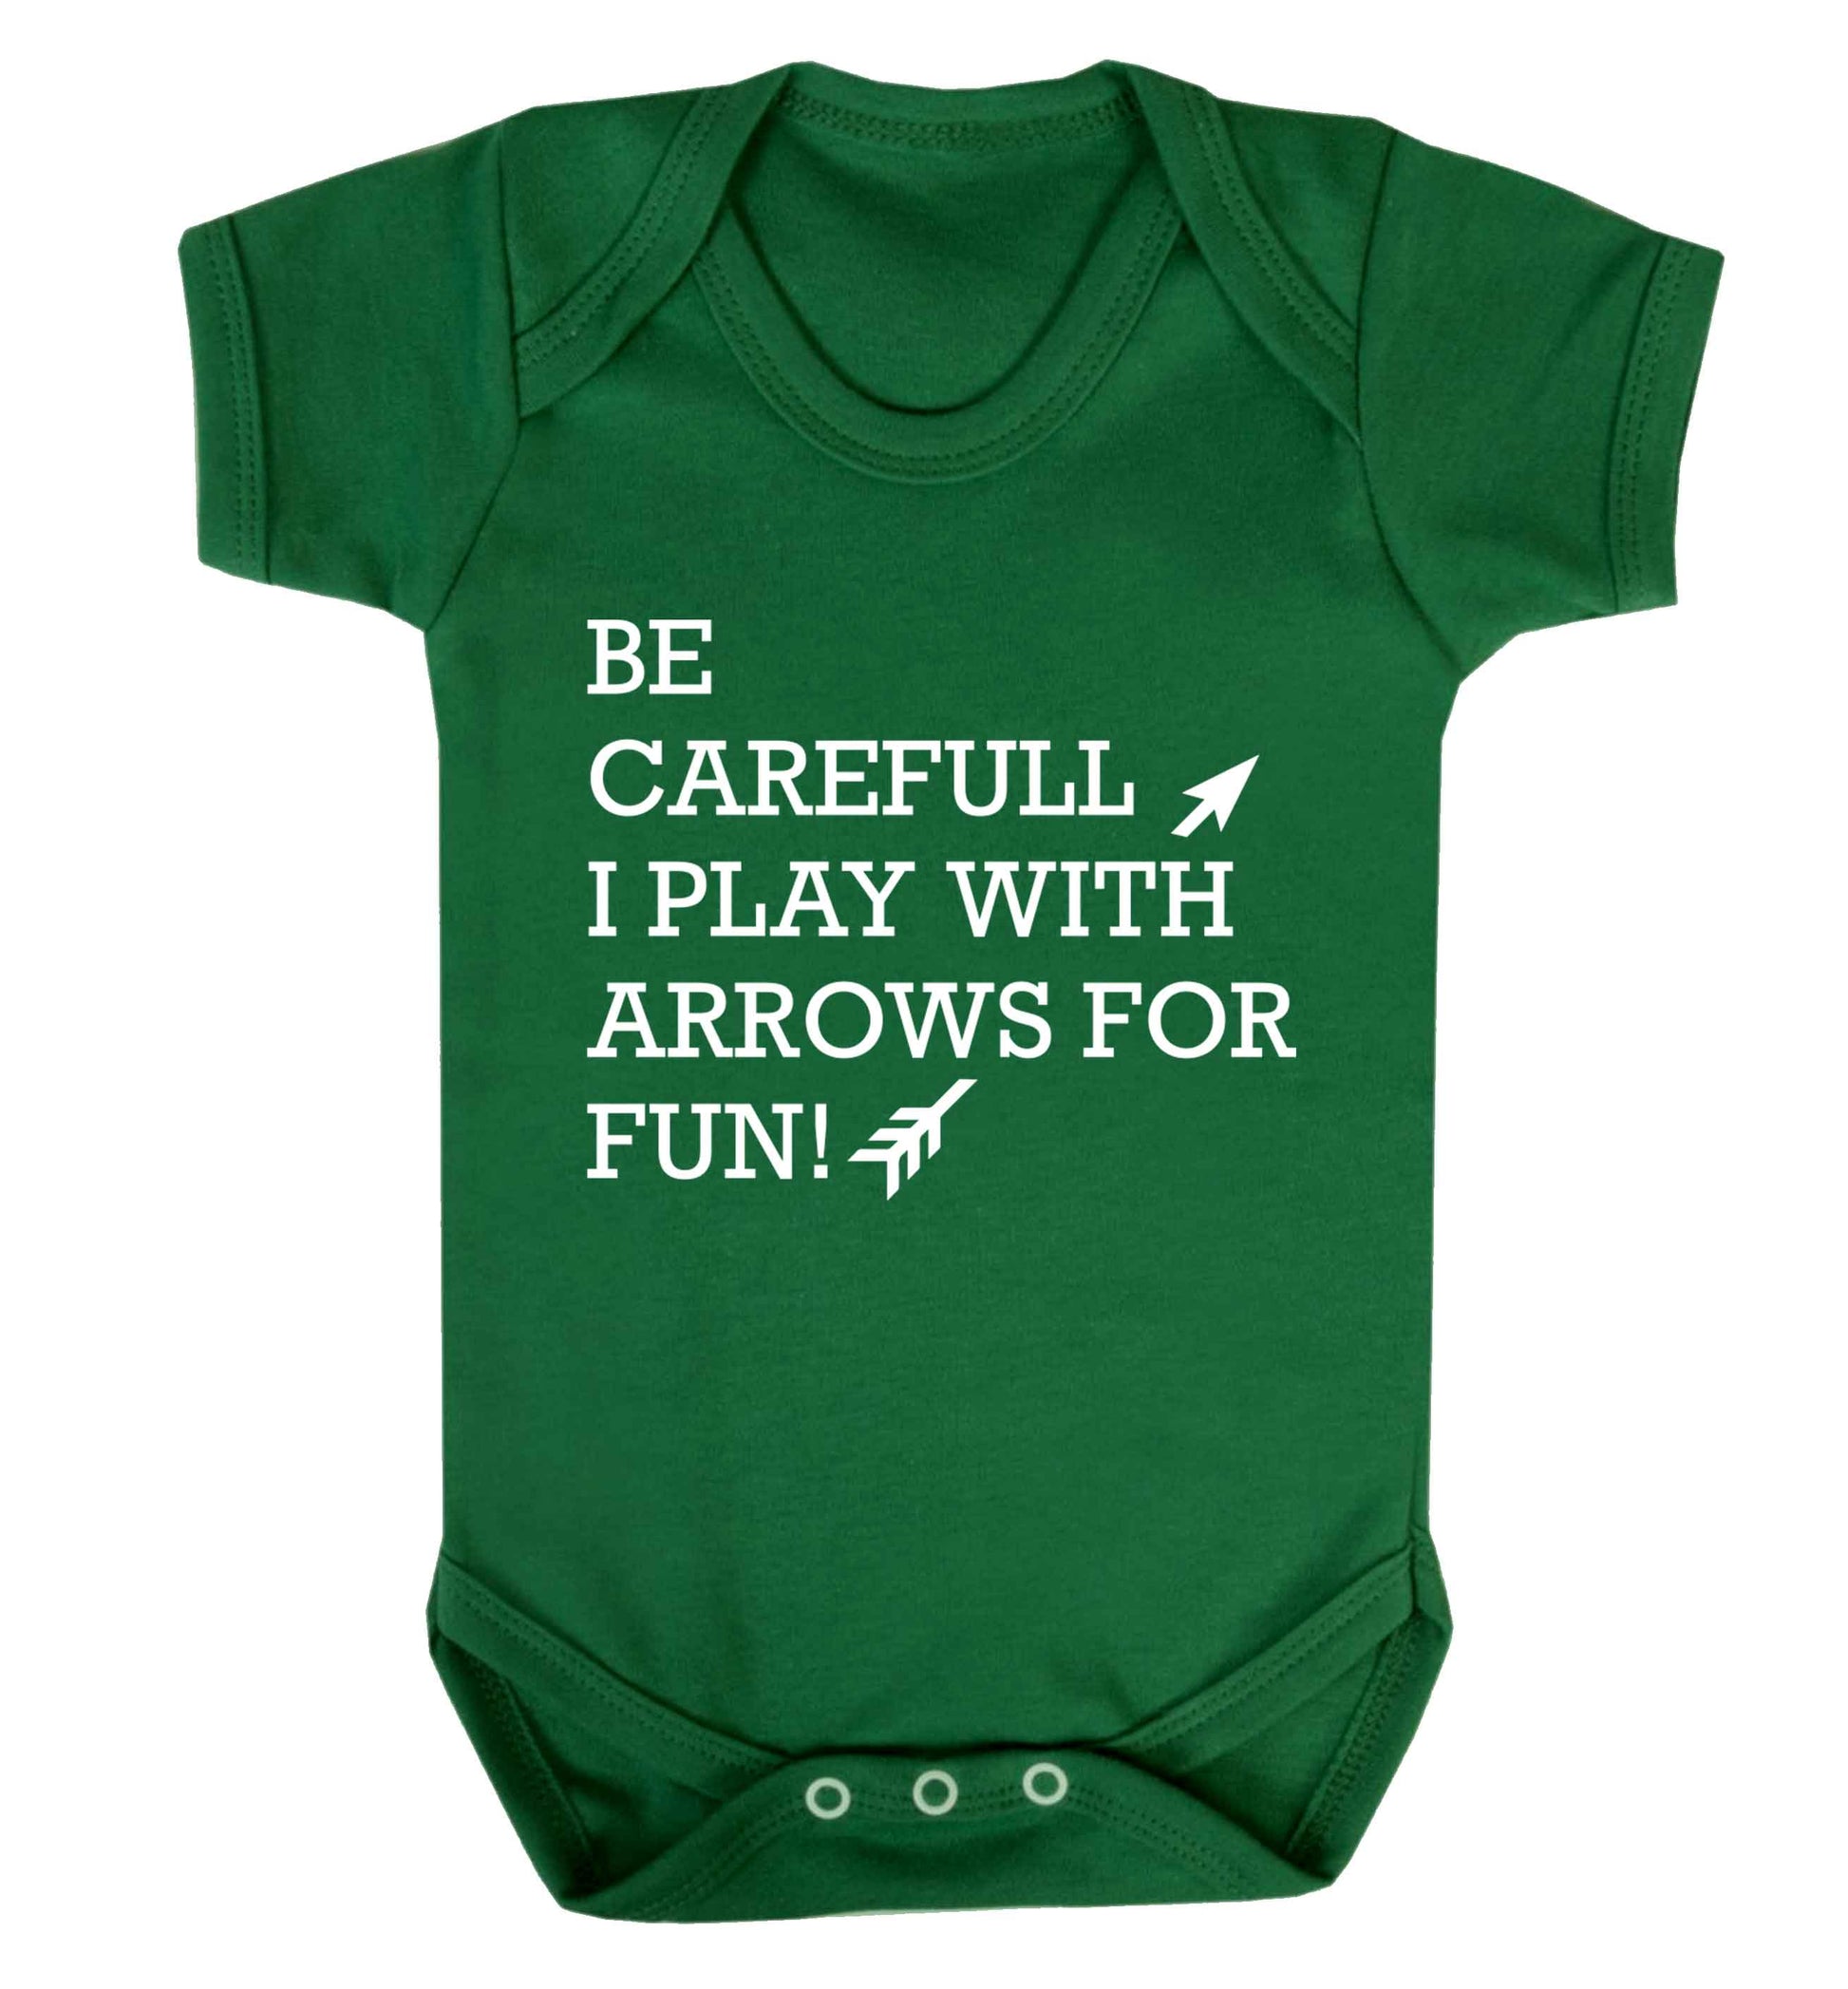 Be carefull I play with arrows for fun Baby Vest green 18-24 months